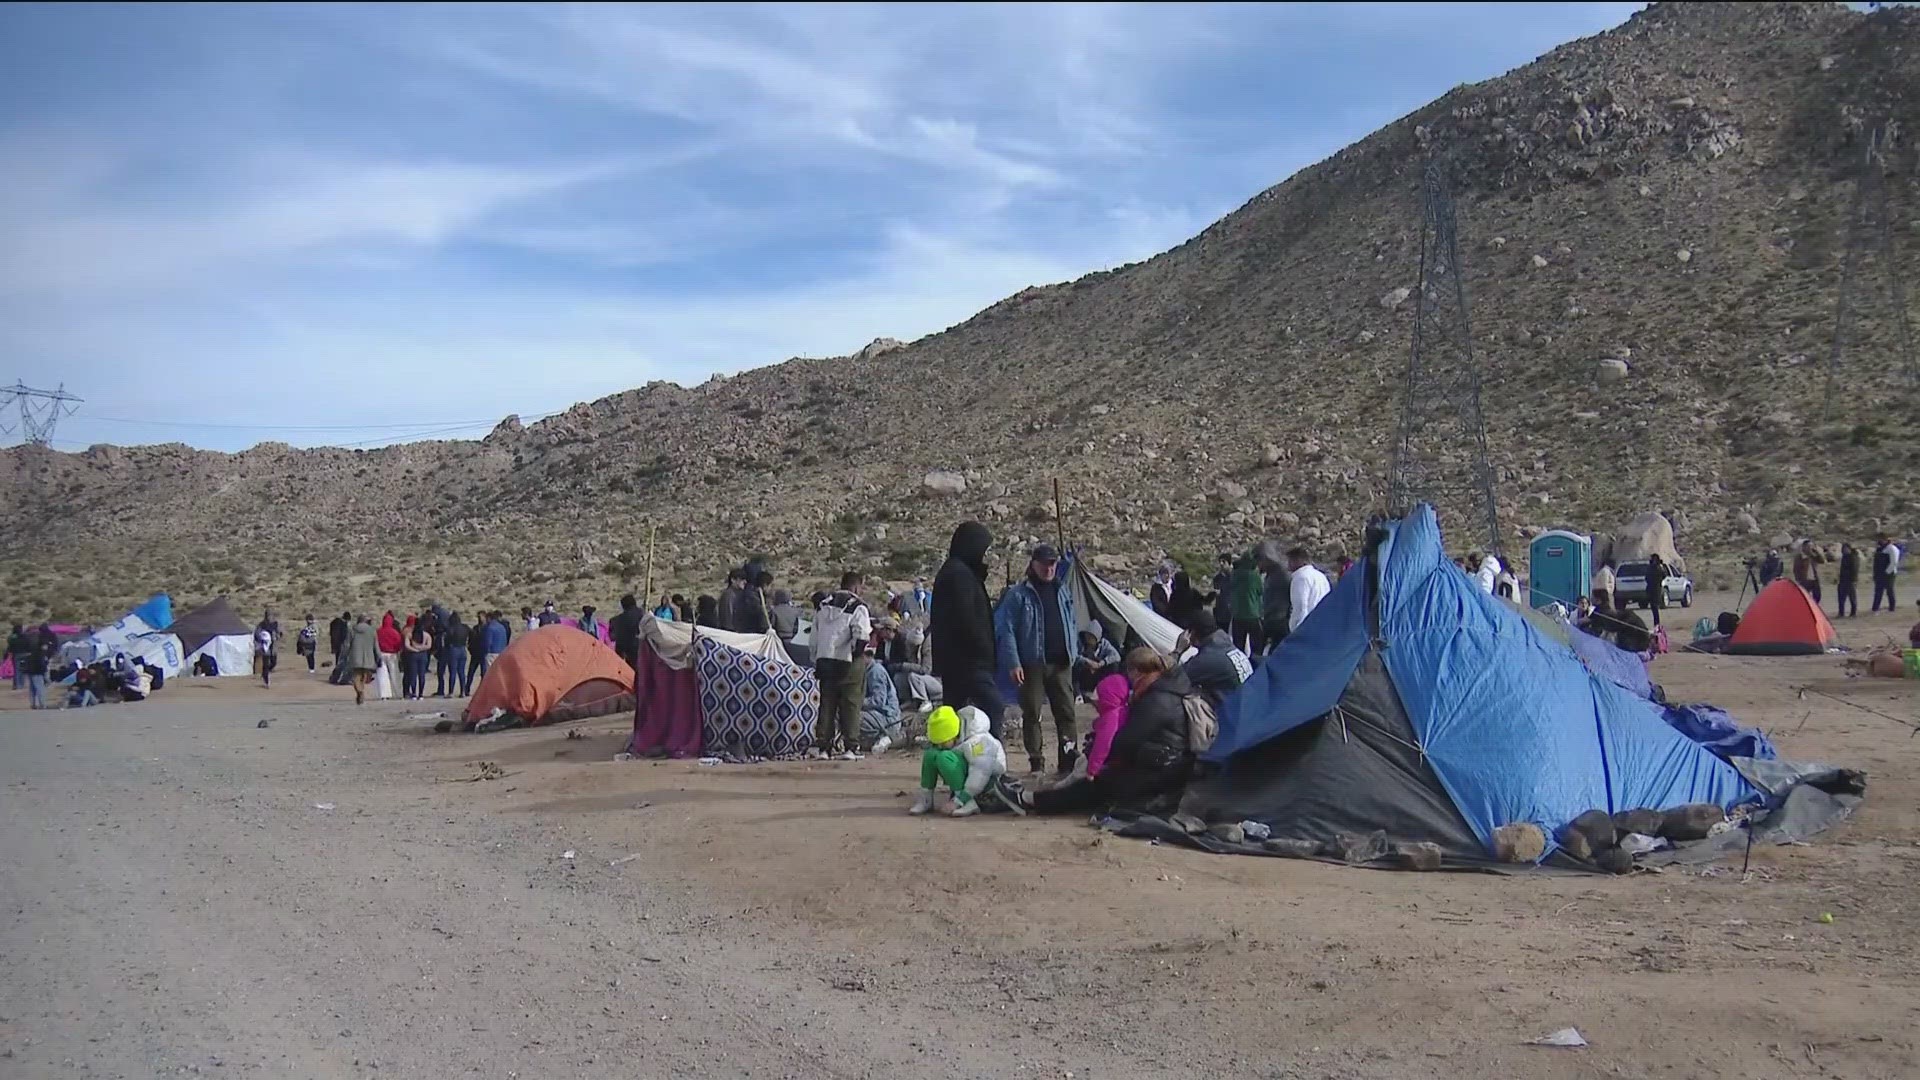 Hundreds of migrants are arriving every day in the far East County area where temperatures are expected to start dropping below freezing at night.